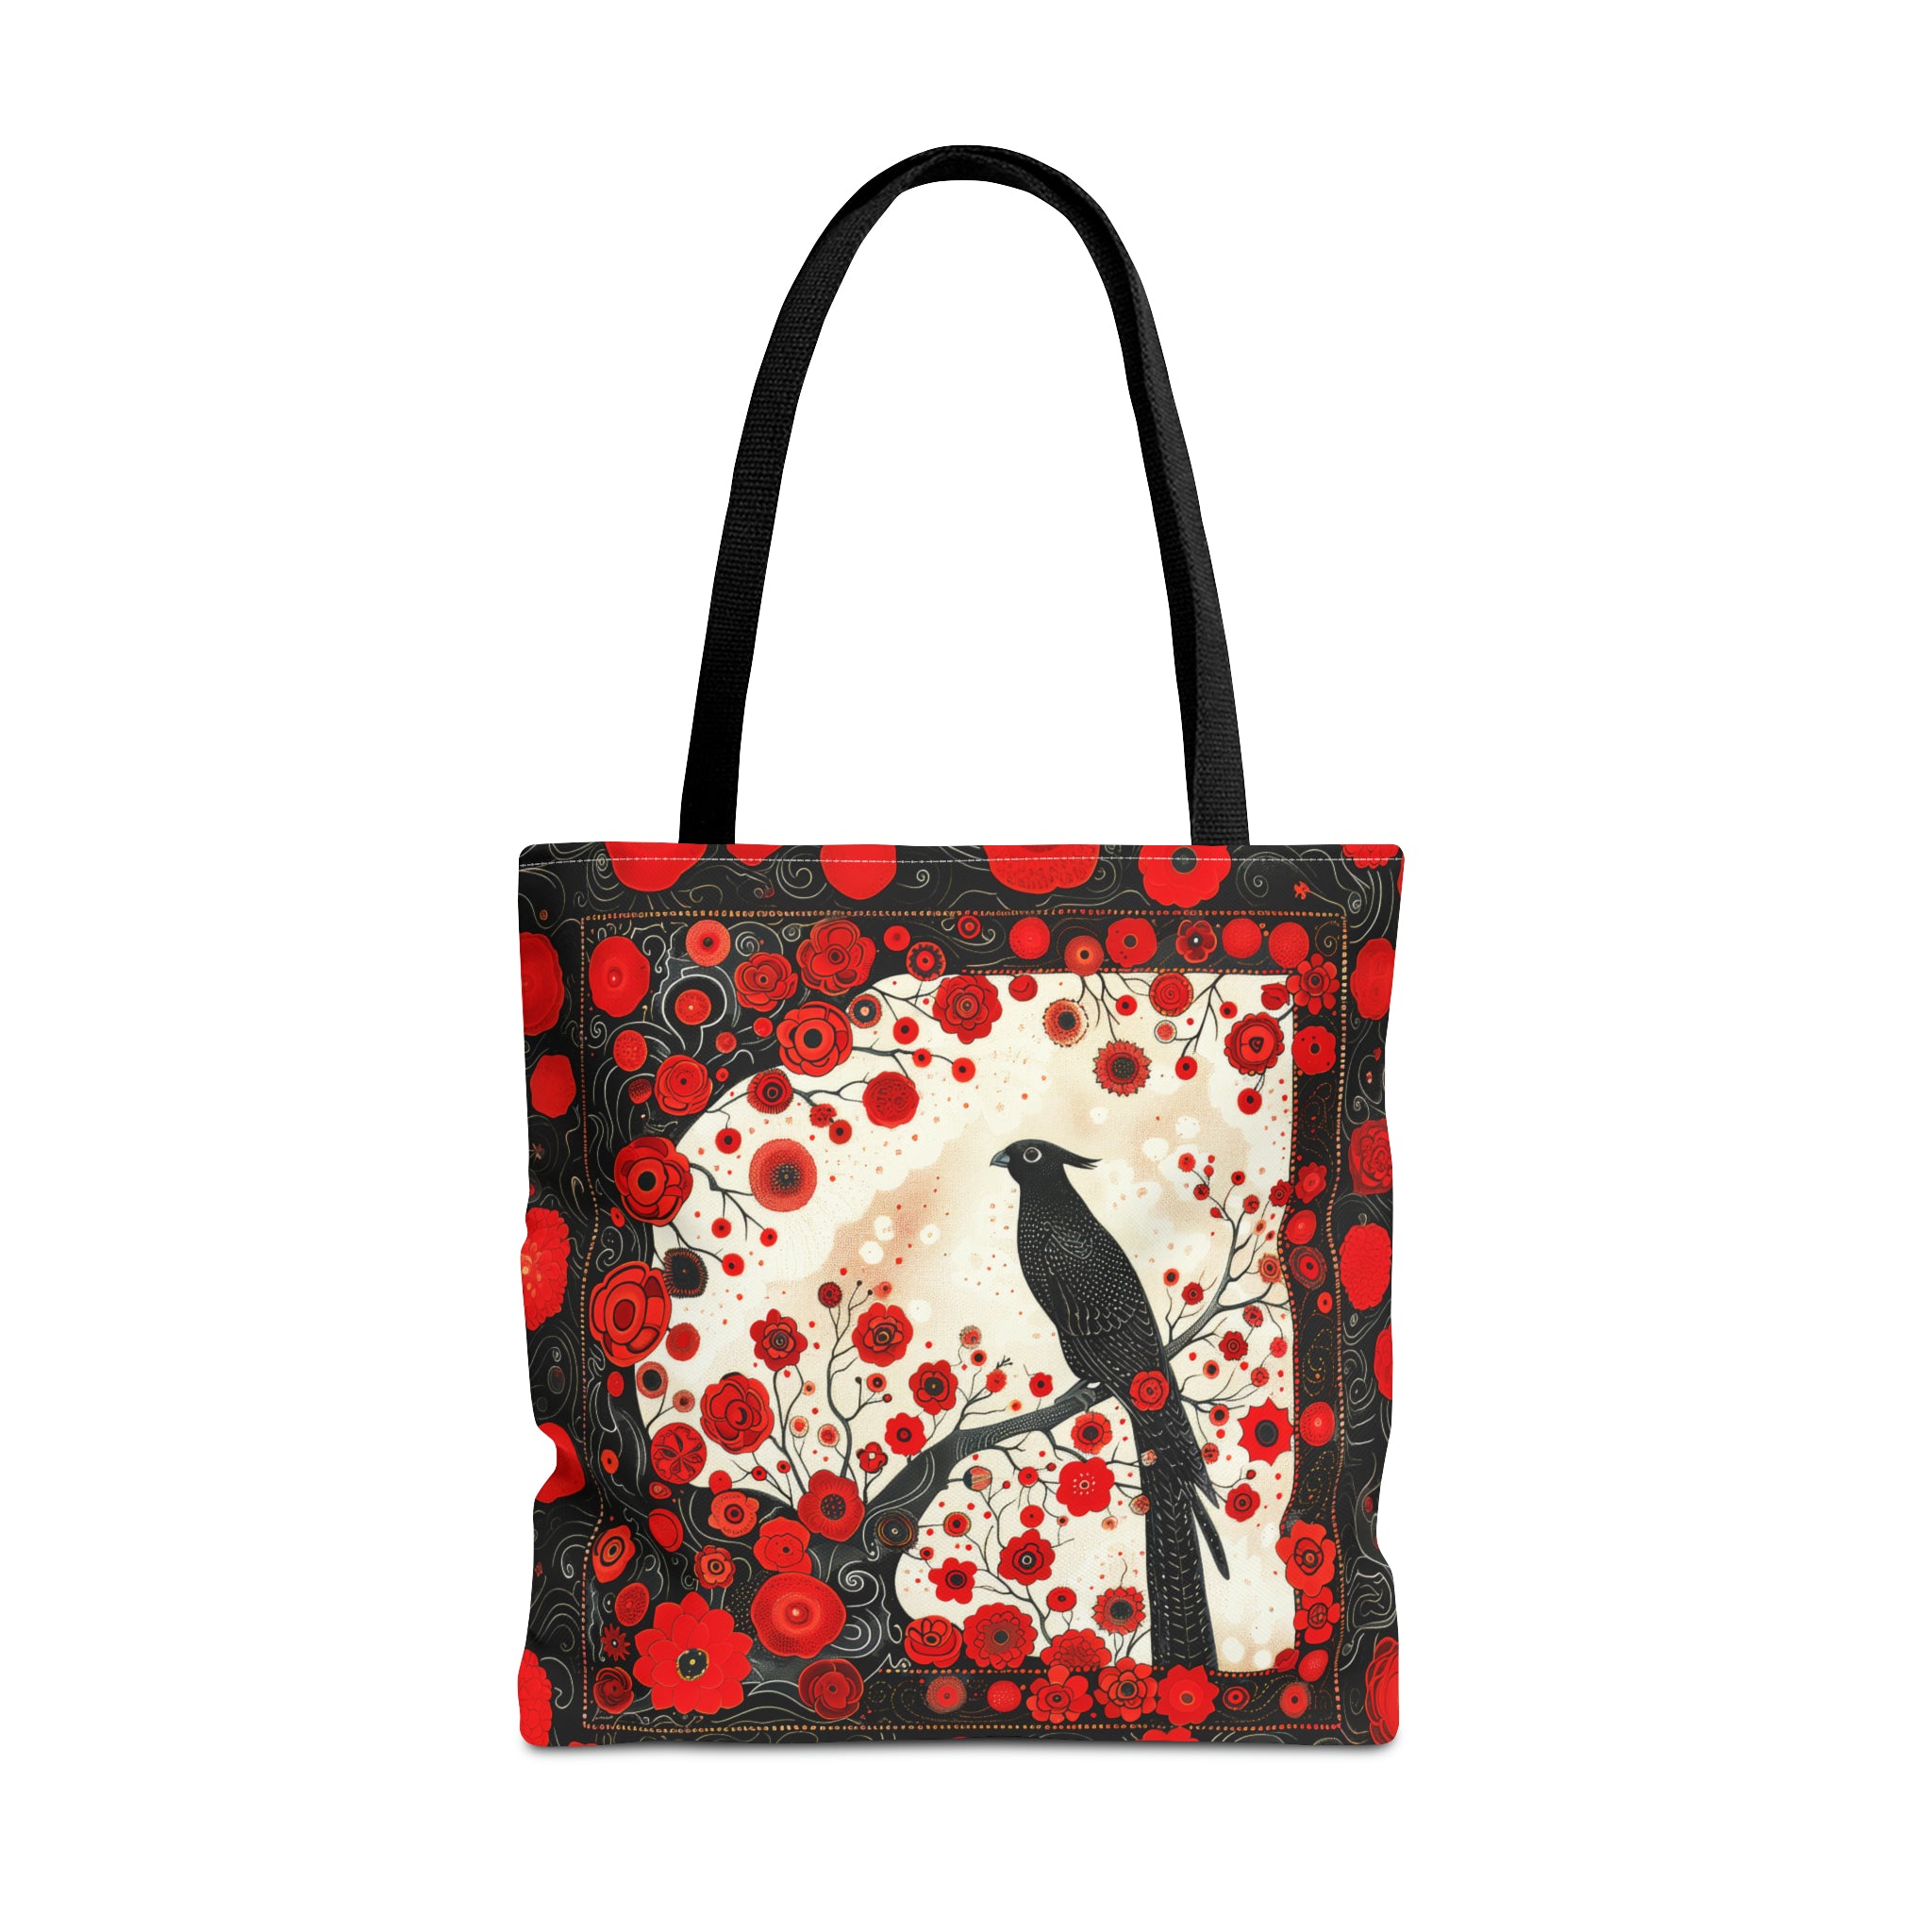 Canvas Tote Bag, vintage inspired bird design with red flowers, vibrant artistic accessory, whimsical all over print bag in three sizes